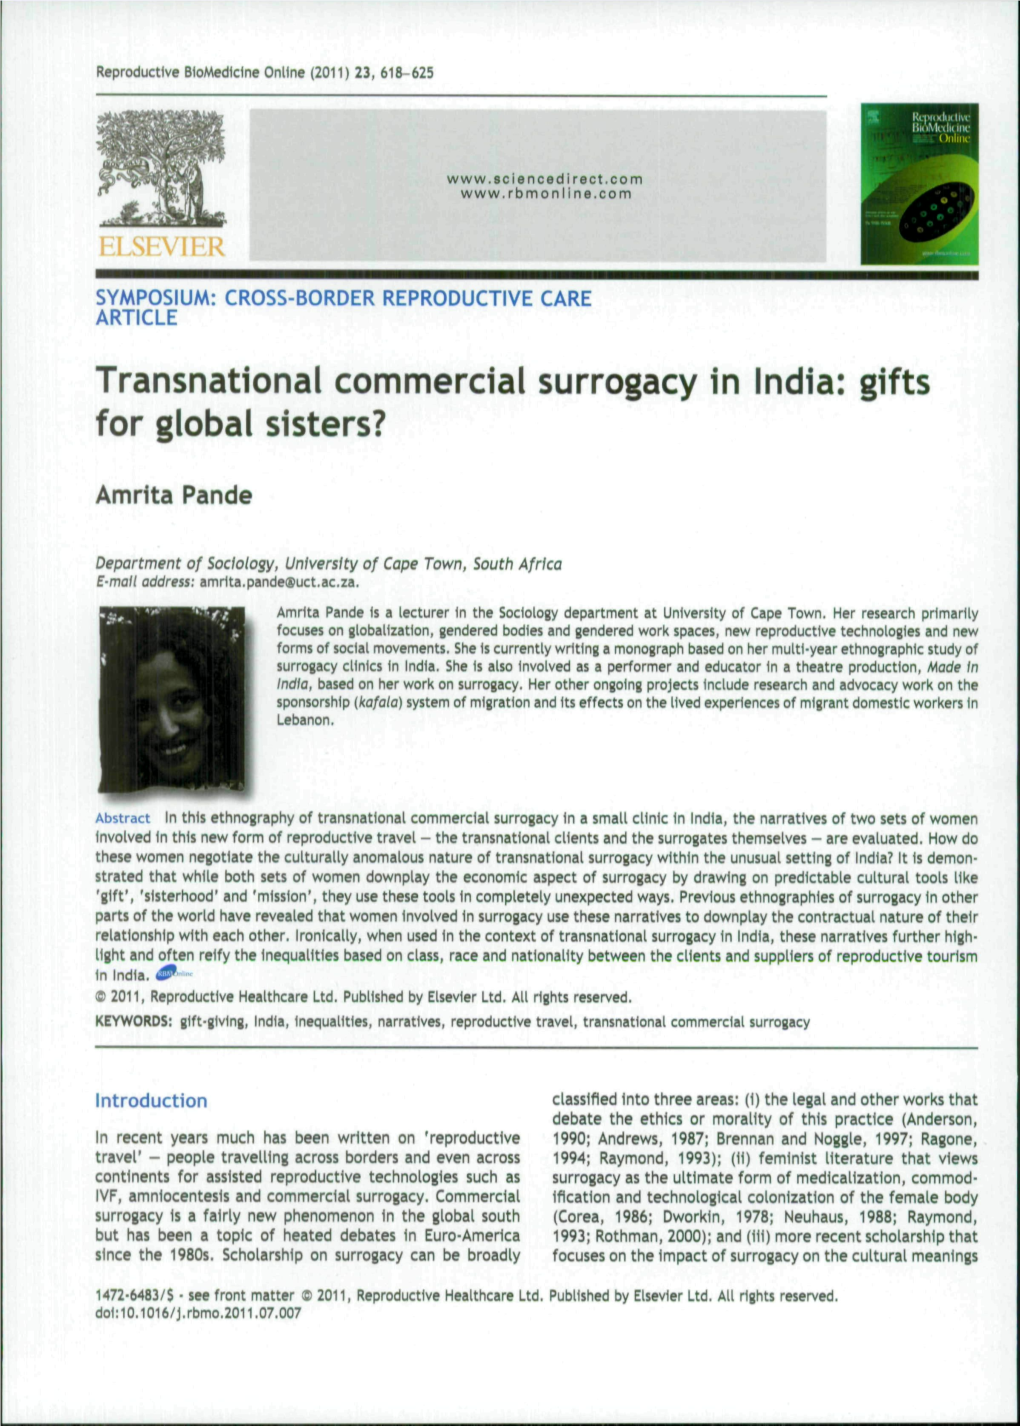 Transnational Commercial Surrogacy in India: Gifts for Global Sisters?